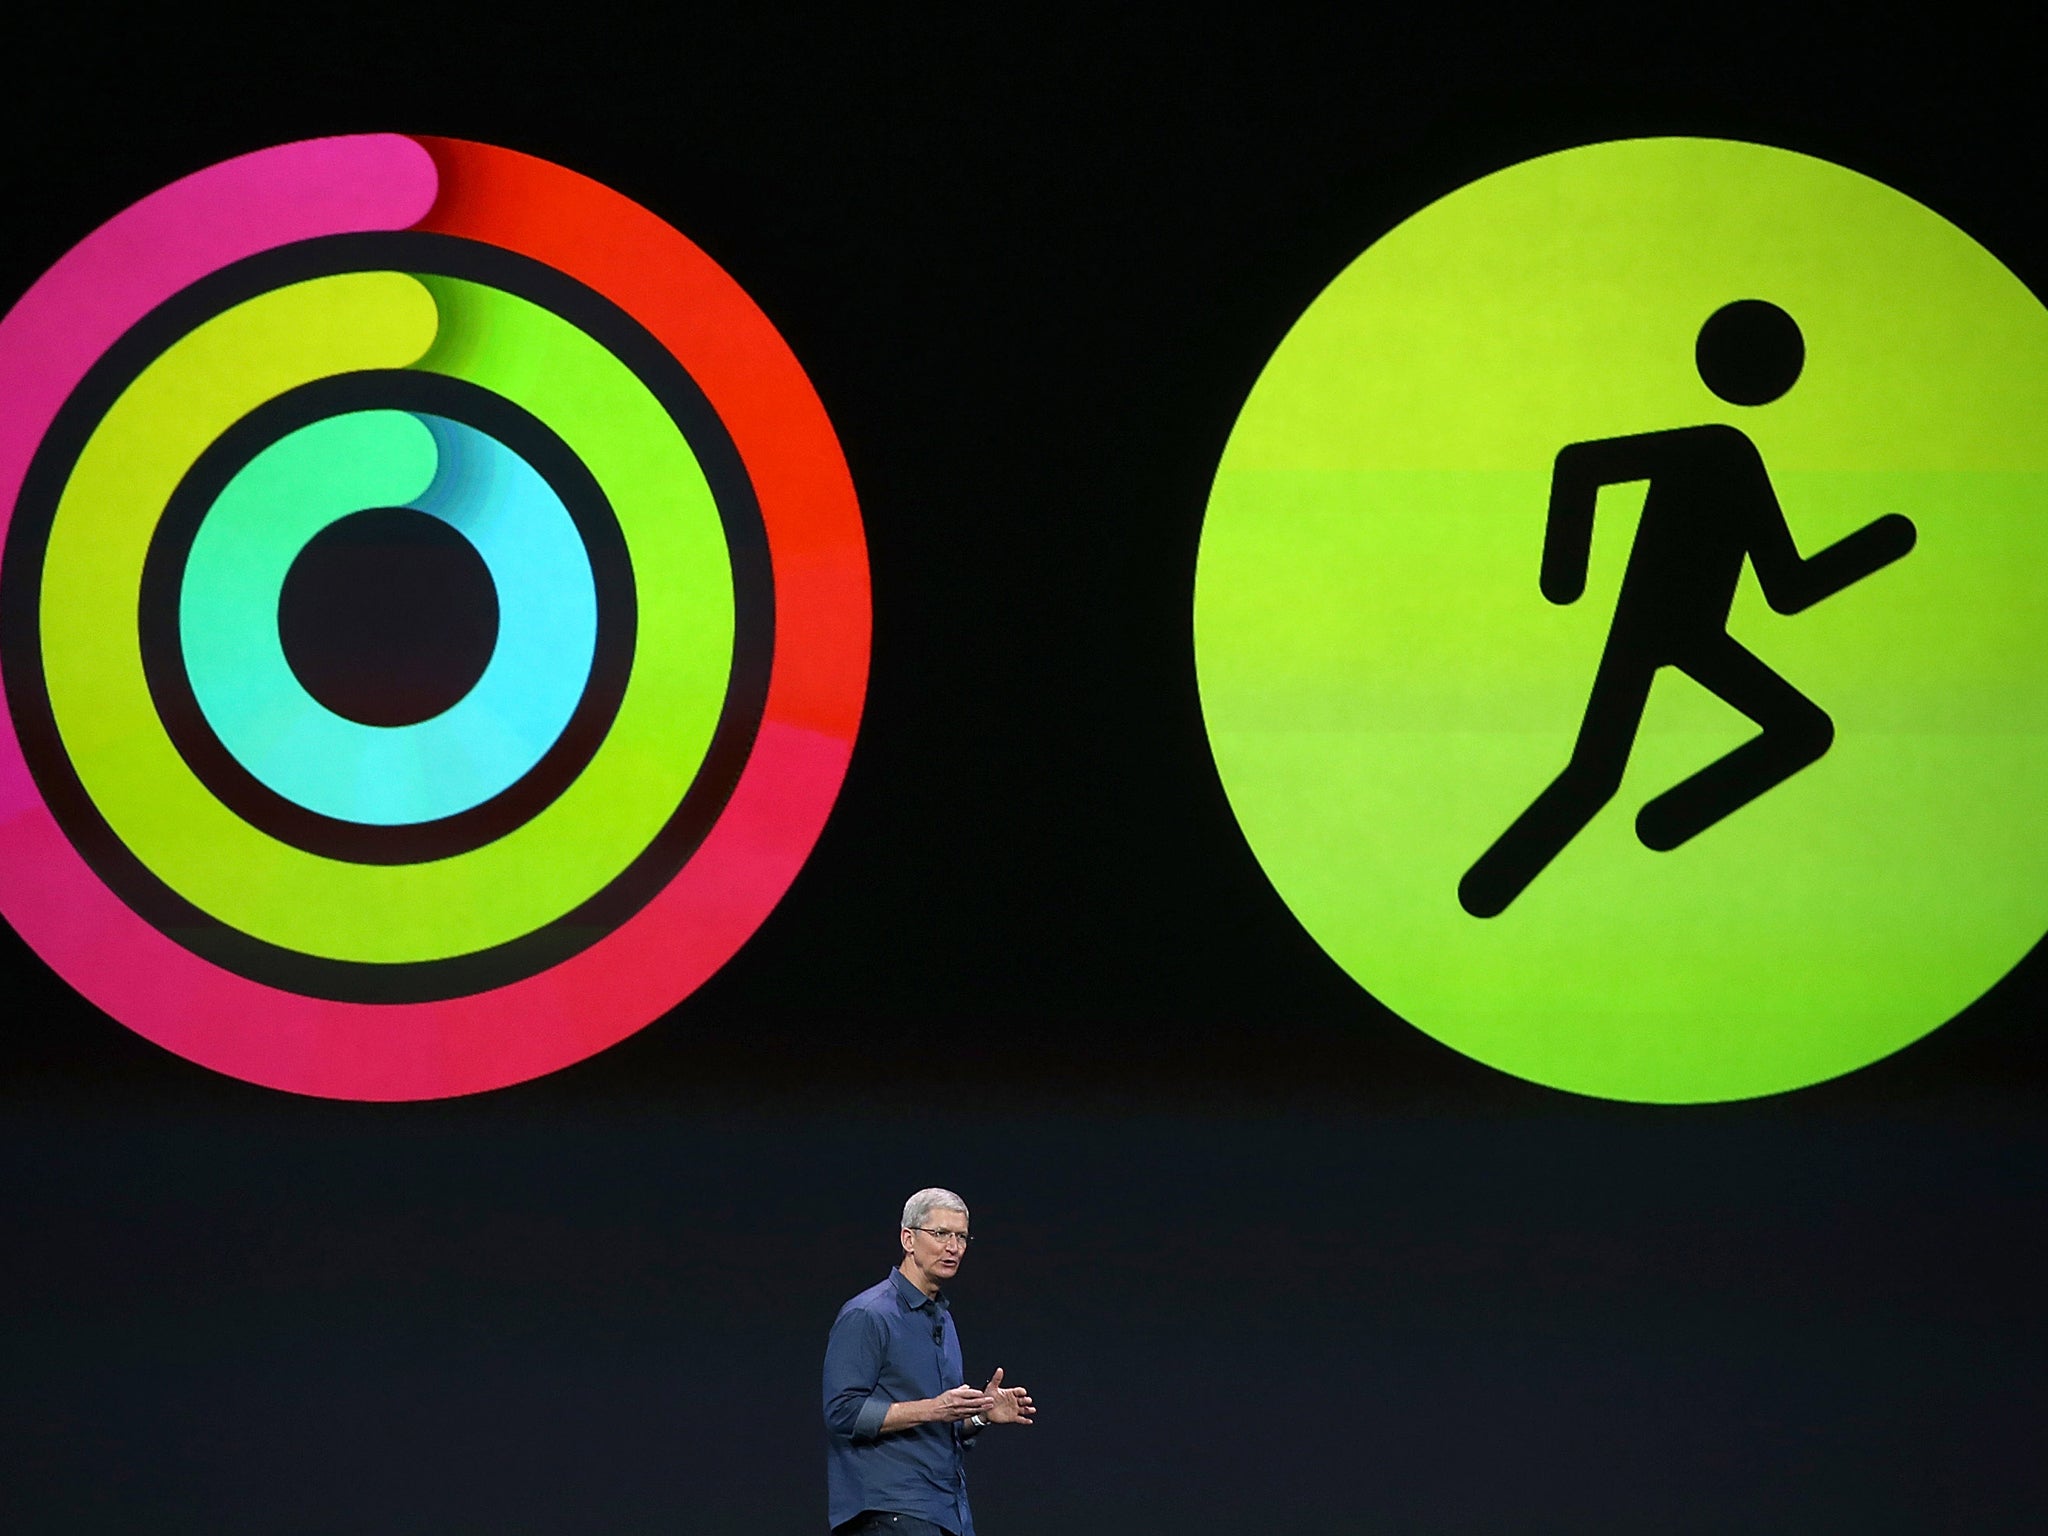 Tim Cook introduces the health and fitness tracking features of the Apple Watch at the event in September